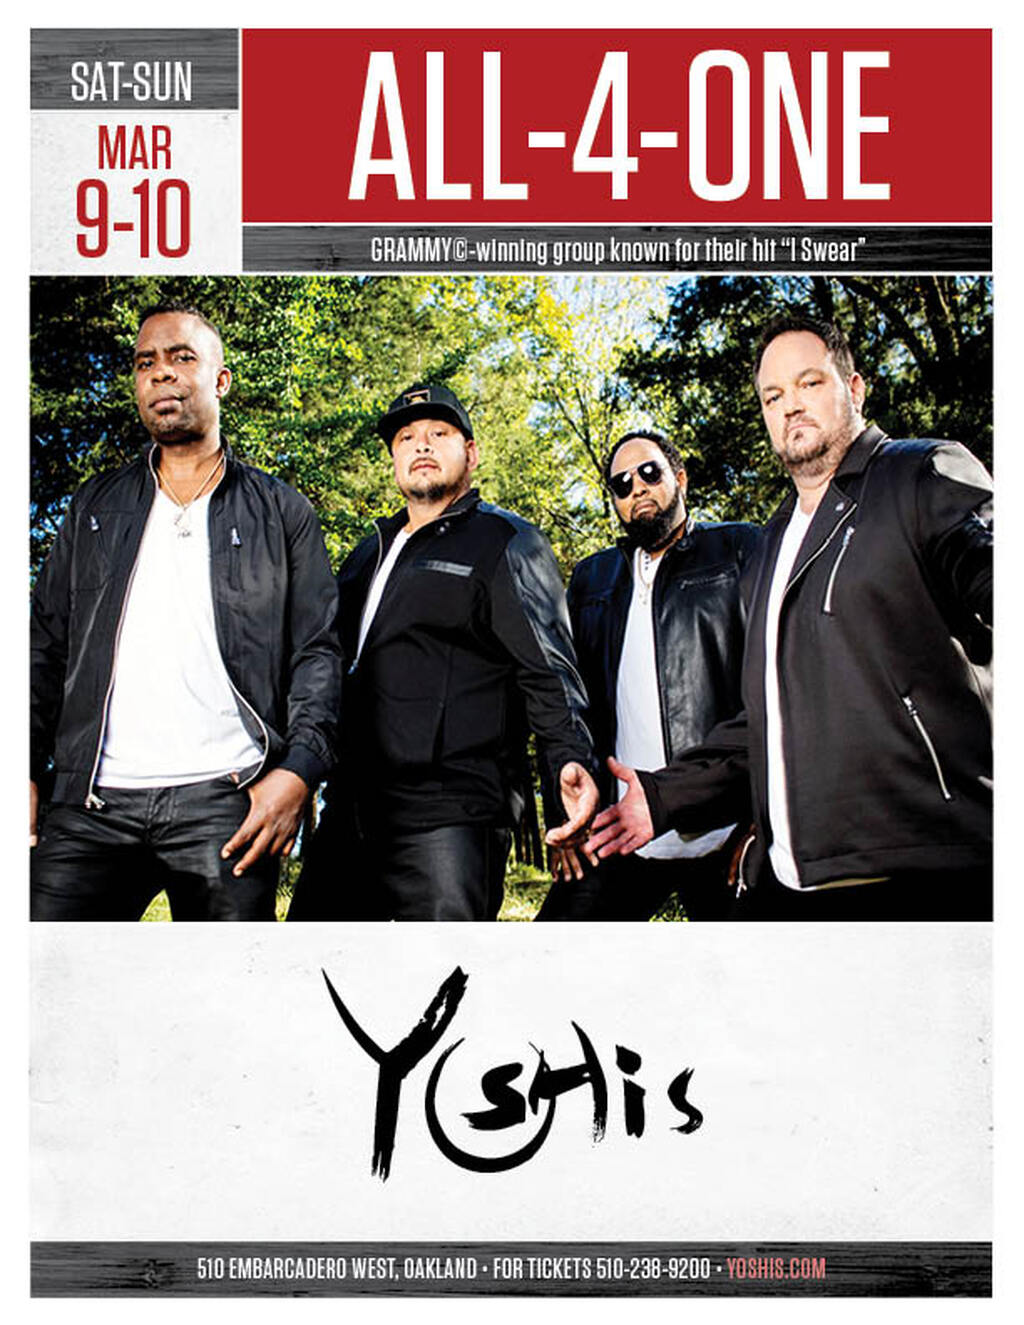 Yoshi s Experience a Night of Music and Fun at Yoshi s in Oakland  promotion flier on Digifli com